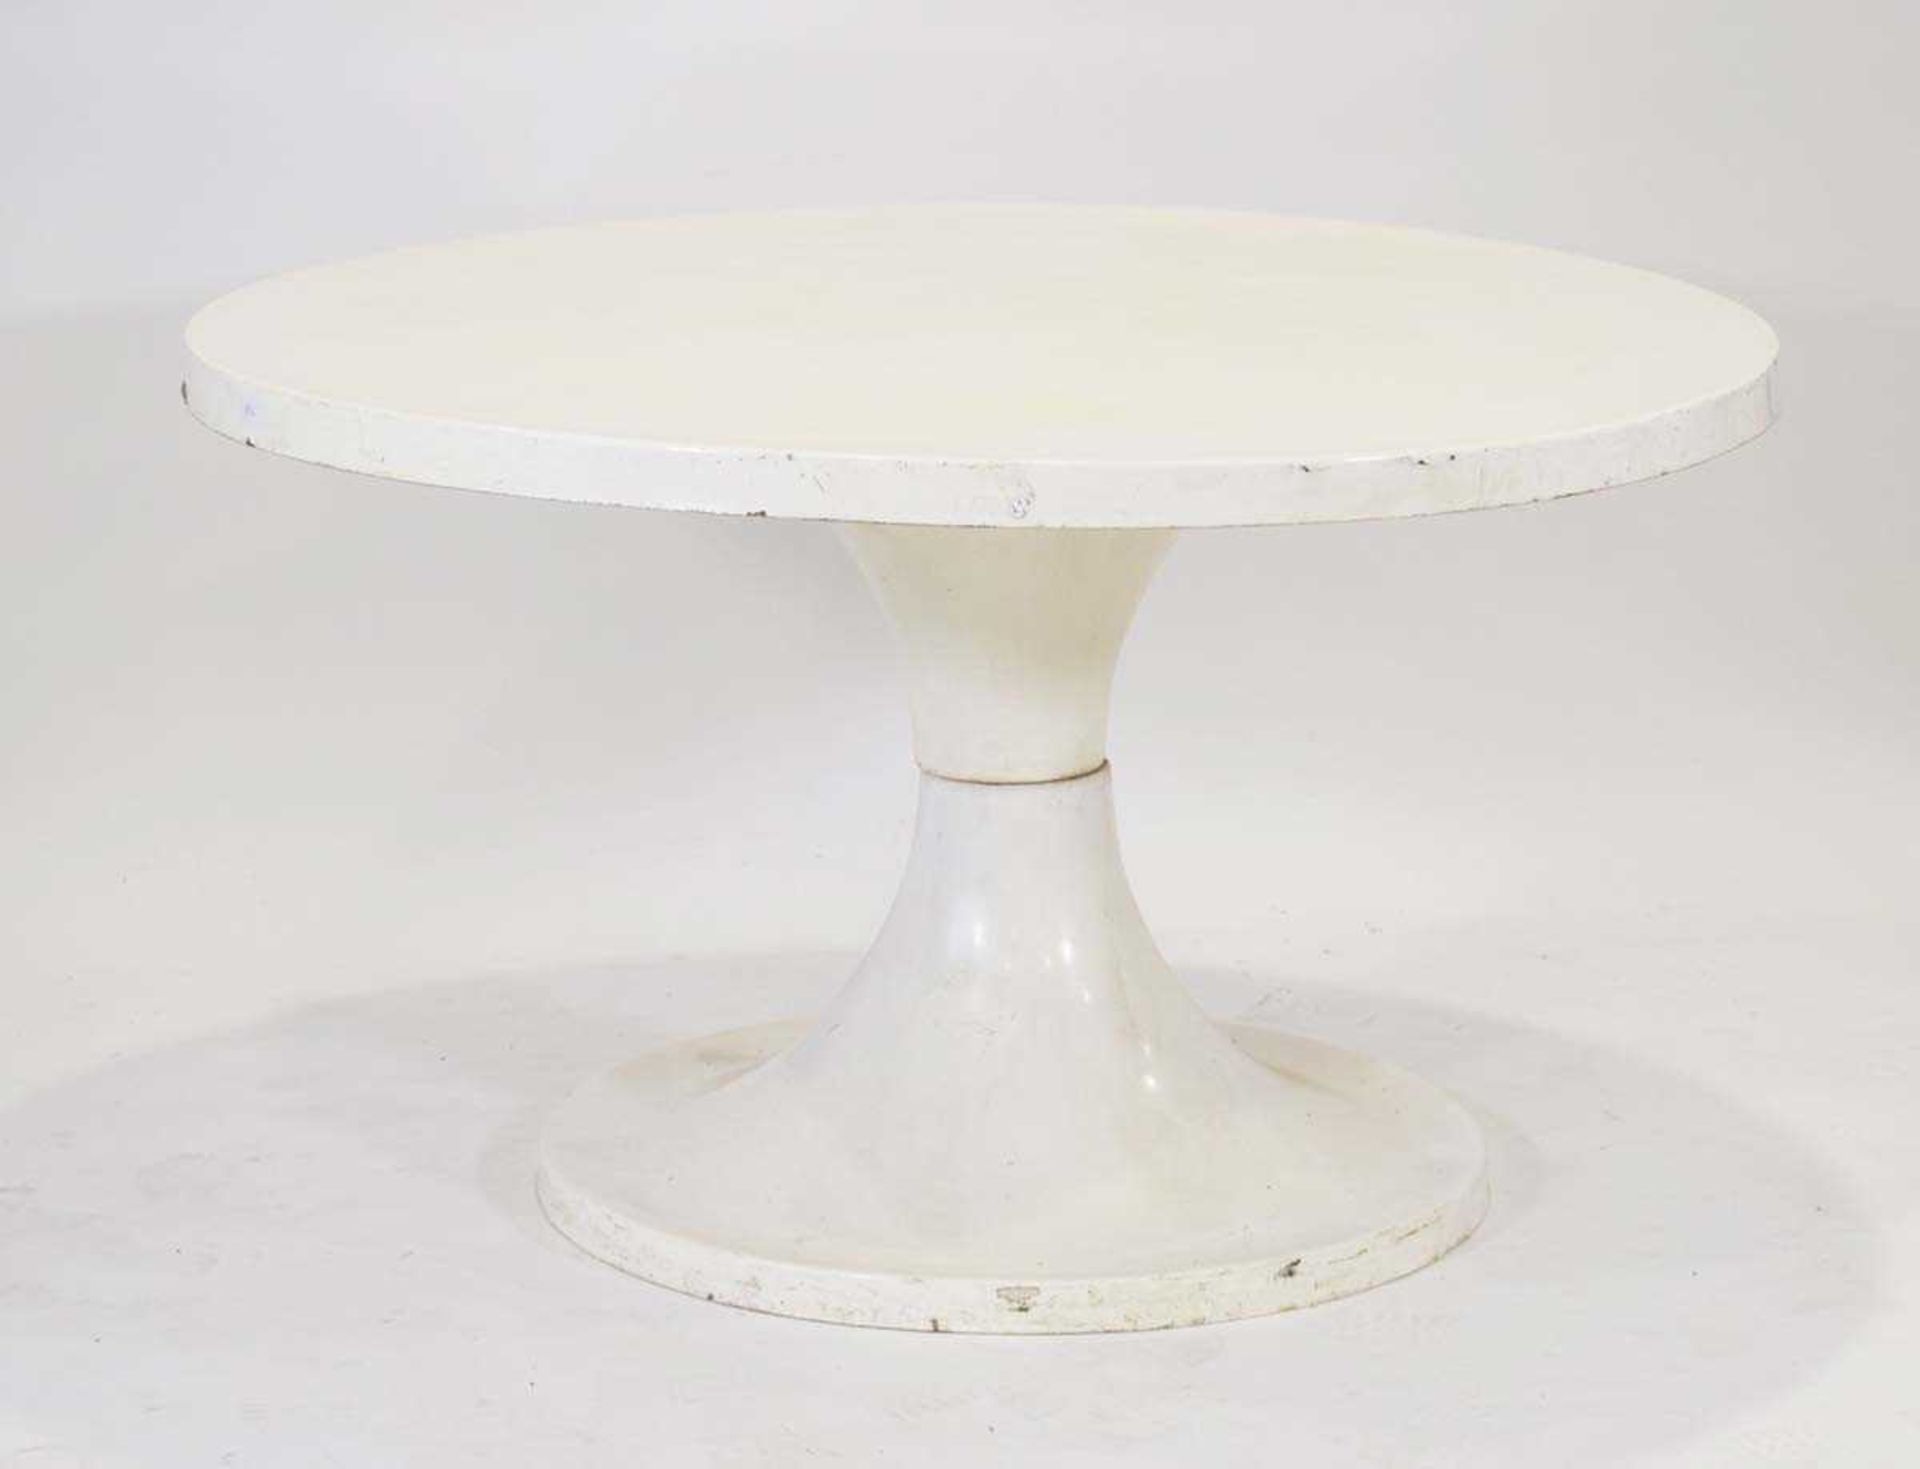 A 1960/70's fibreglass table, the white surface resting on an hour-glass shape base, di. 120 cm